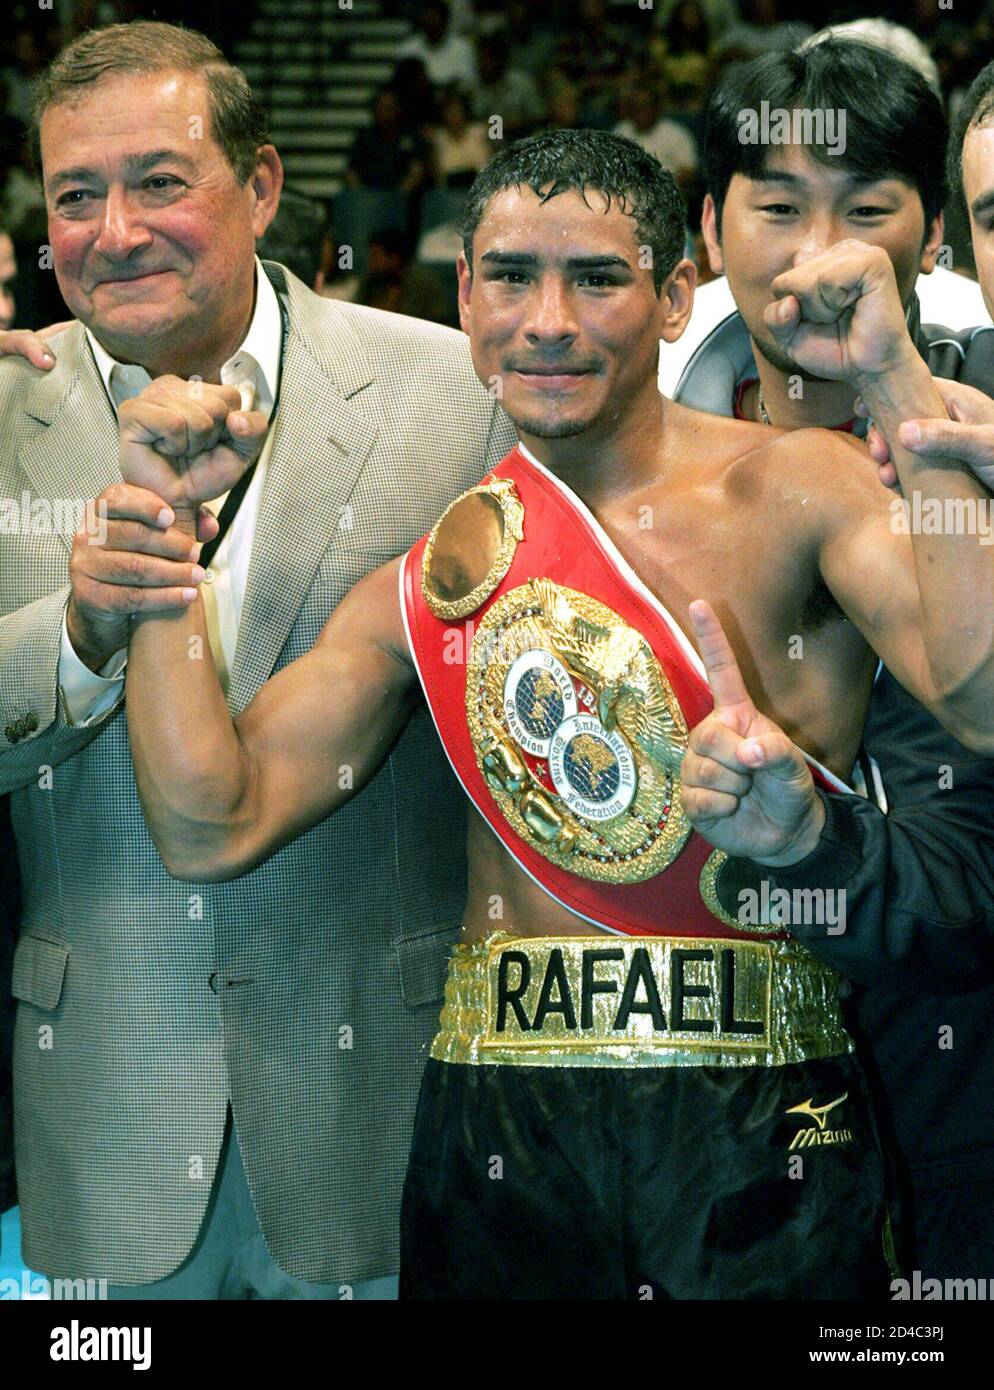 IBF bantamweight champion Rafael Marquez of Mexico City poses with boxing promoter Bob Arum (L) after defeating [Heriberto Ruiz of Los Mochis], Mexico at the MGM Grand Garden Arena in Las Vegas, Nevada, July 31, 2004. Marquez retained his title with a knock out in the third round. Stock Photo